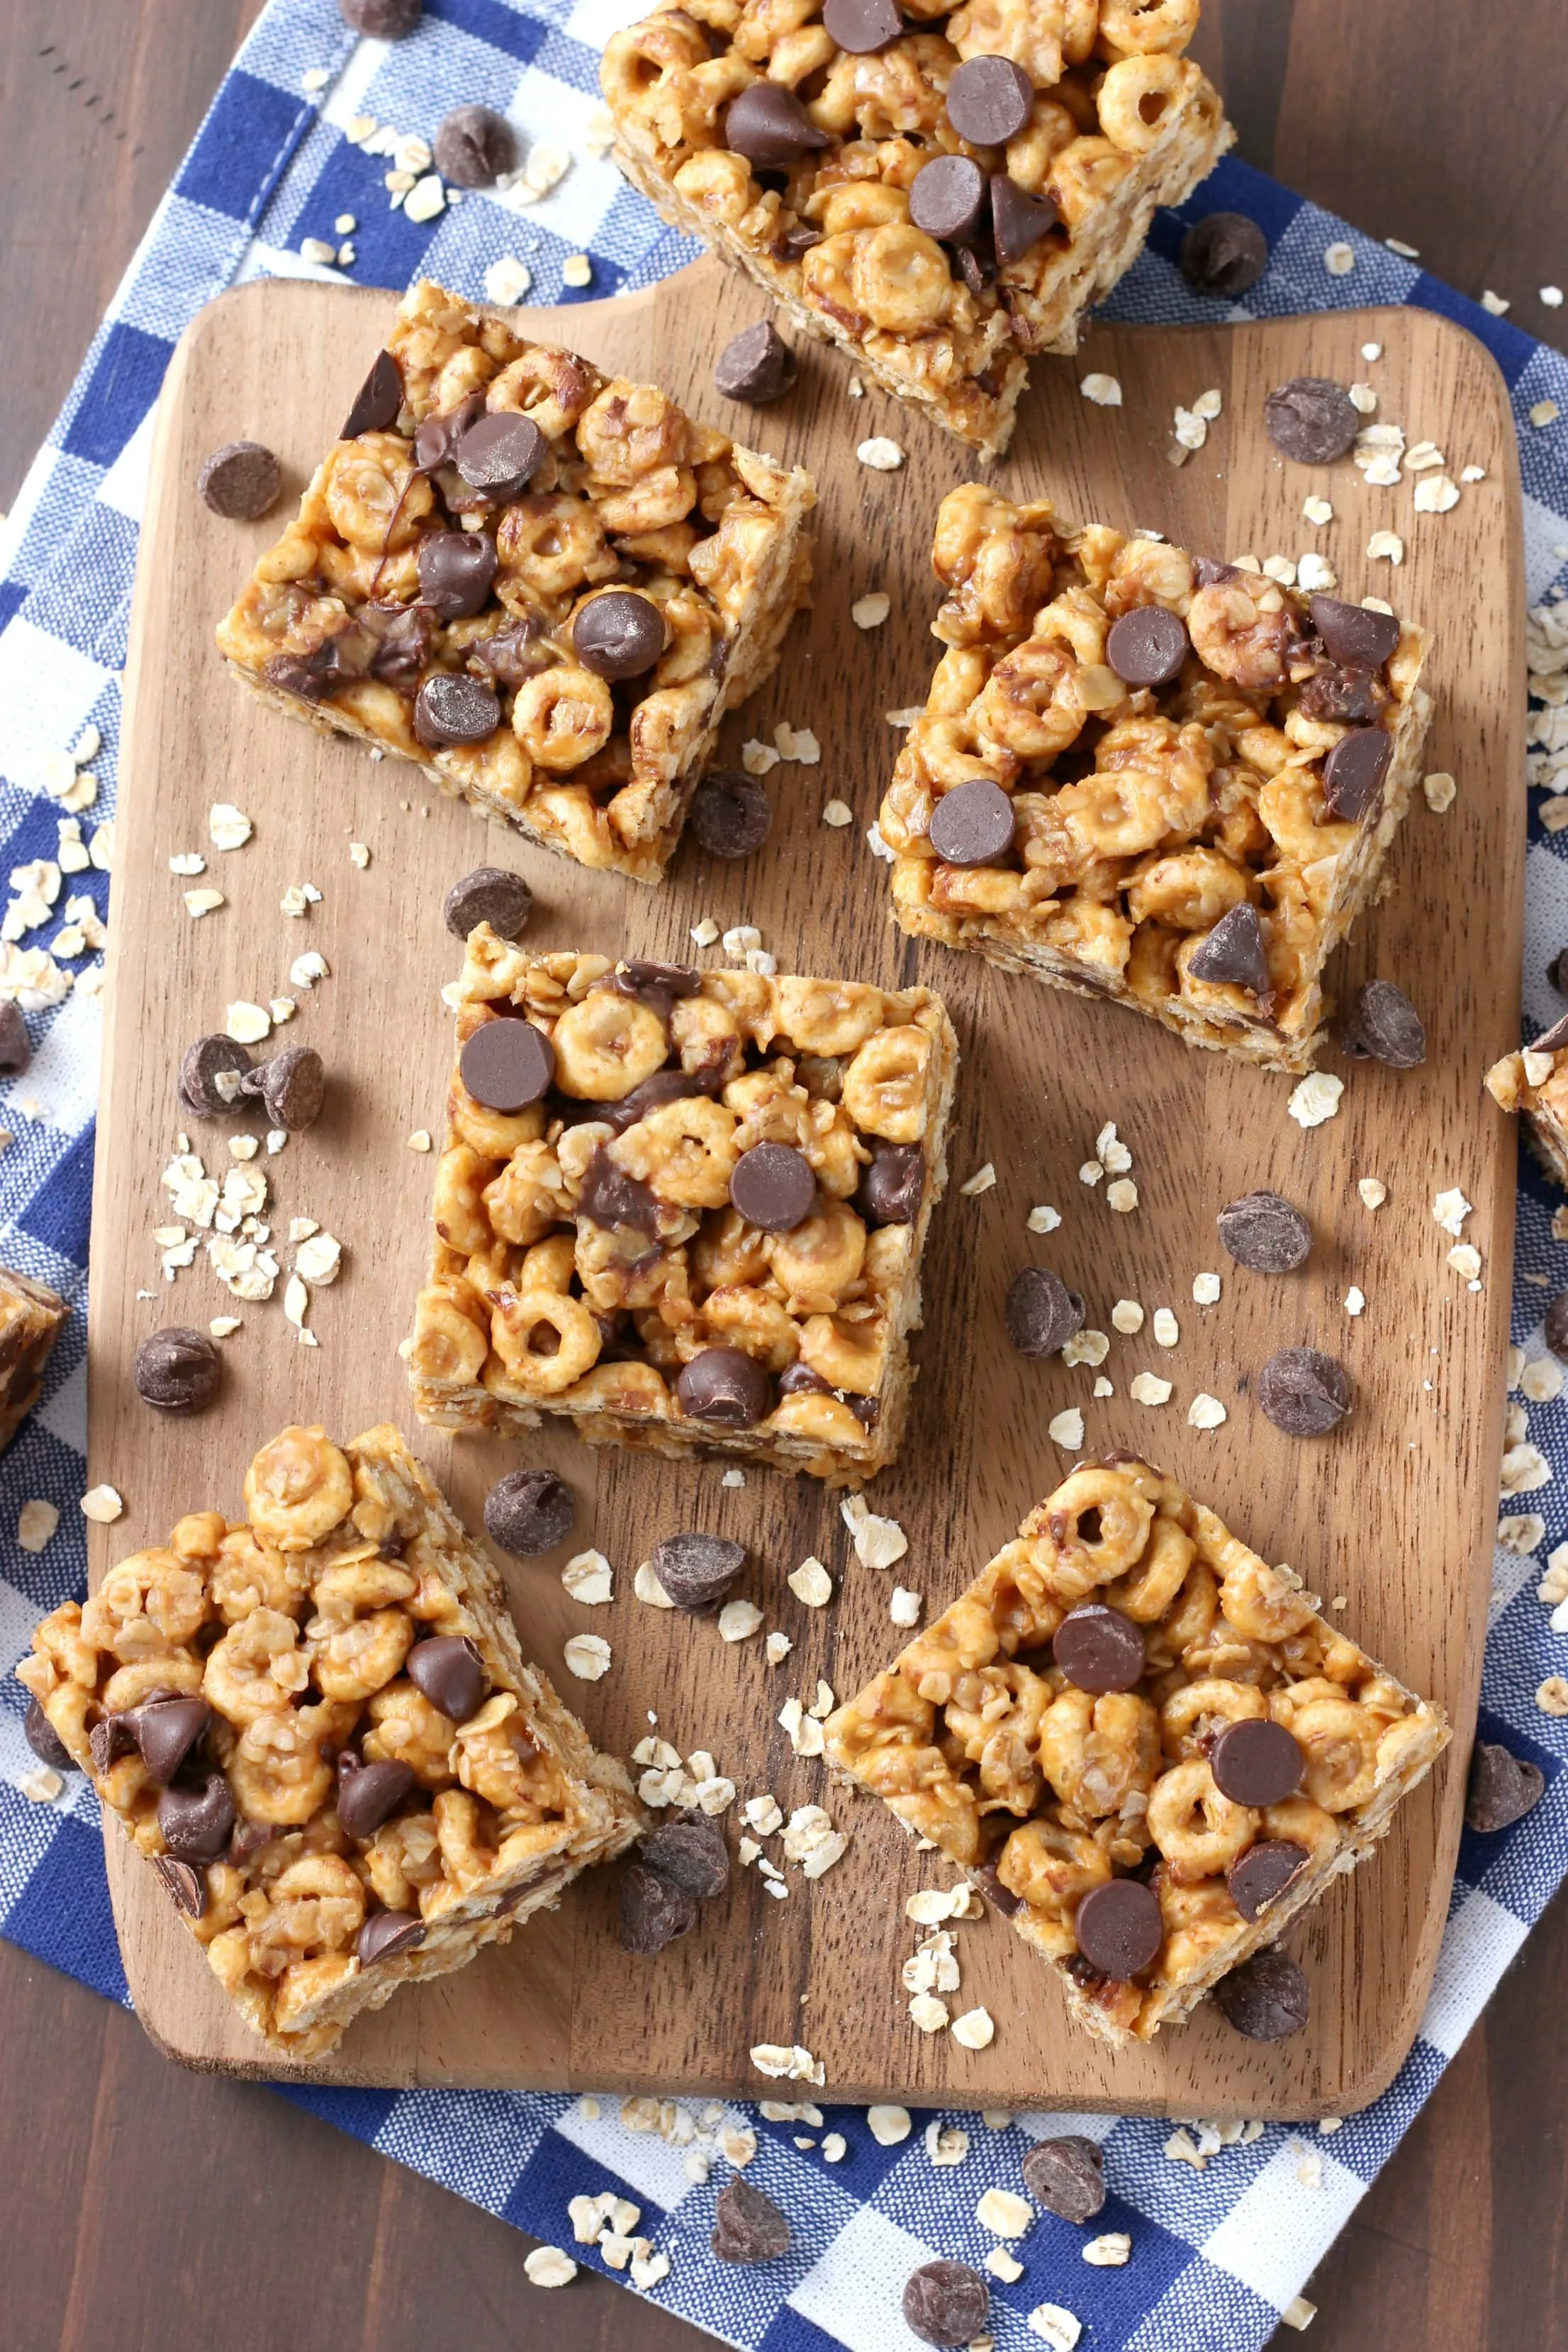 No Bake Chocolate Peanut Butter Honey Cereal Bars Recipe from A Kitchen Addiction